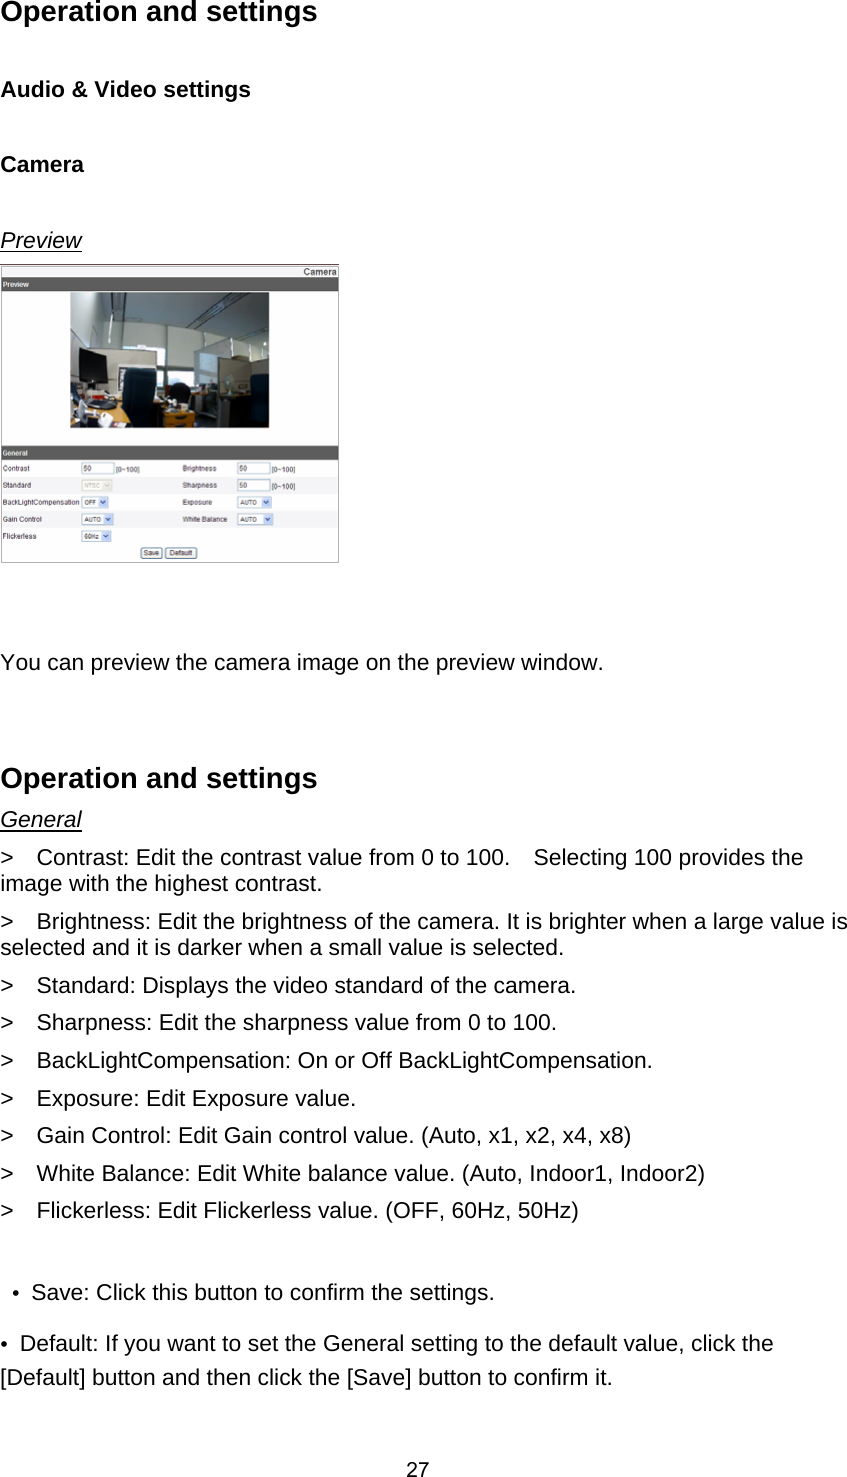  27Operation and settings      Audio &amp; Video settings  Camera    Preview    You can preview the camera image on the preview window.     Operation and settings     General &gt;    Contrast: Edit the contrast value from 0 to 100.    Selecting 100 provides the image with the highest contrast.     &gt;    Brightness: Edit the brightness of the camera. It is brighter when a large value is selected and it is darker when a small value is selected.     &gt;    Standard: Displays the video standard of the camera.     &gt;    Sharpness: Edit the sharpness value from 0 to 100.             &gt;    BackLightCompensation: On or Off BackLightCompensation.       &gt;  Exposure: Edit Exposure value.        &gt;    Gain Control: Edit Gain control value. (Auto, x1, x2, x4, x8)       &gt;    White Balance: Edit White balance value. (Auto, Indoor1, Indoor2)     &gt;    Flickerless: Edit Flickerless value. (OFF, 60Hz, 50Hz)       •  Save: Click this button to confirm the settings.     •  Default: If you want to set the General setting to the default value, click the [Default] button and then click the [Save] button to confirm it.        